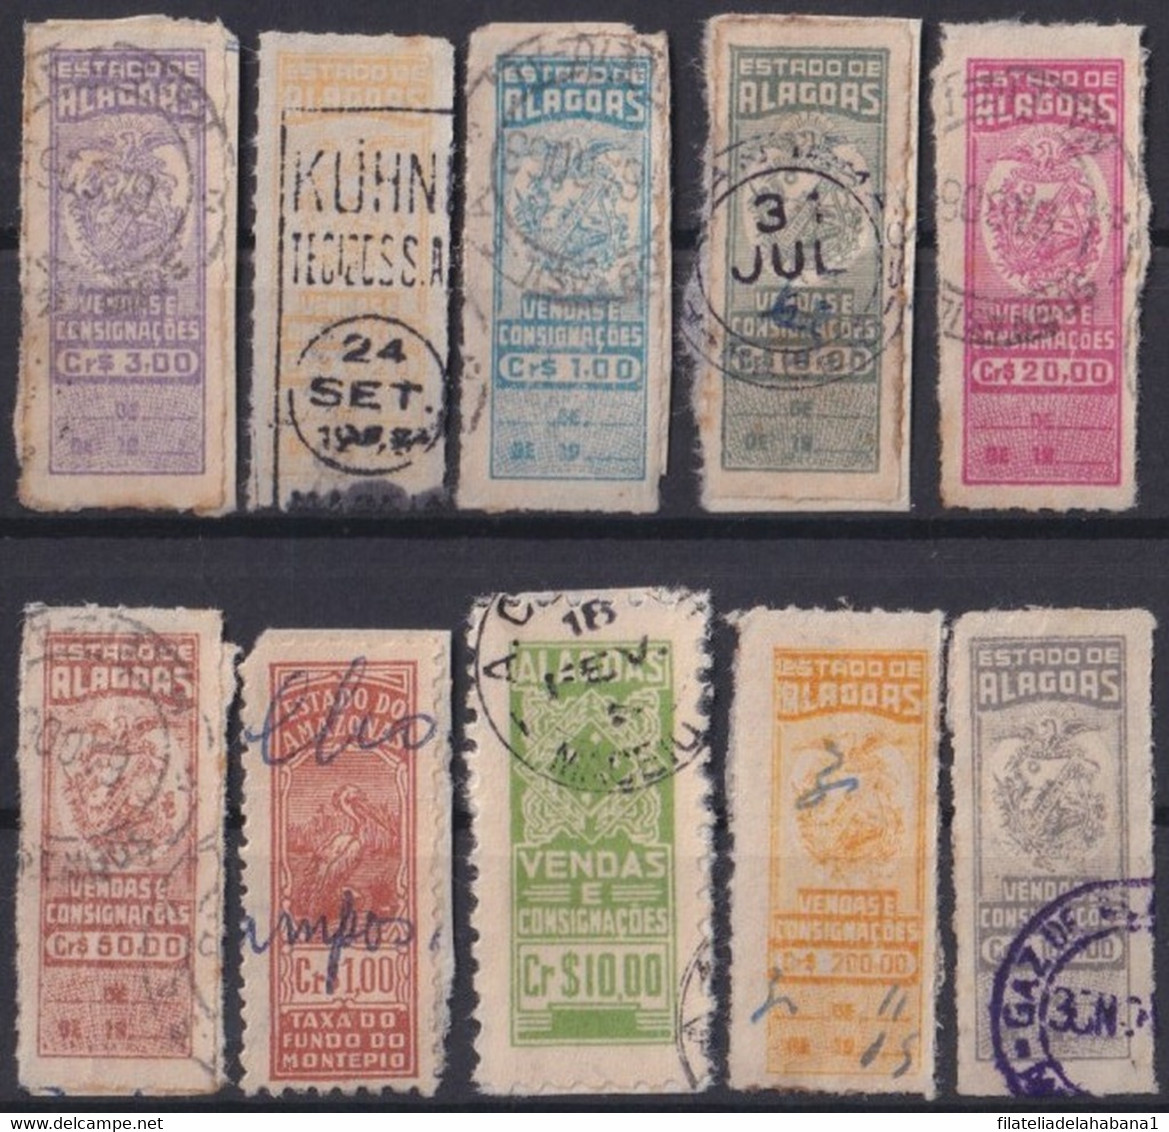 F-EX29493 BRAZIL BRASIL FEDERAL LOCAL REVENUE STAMPS LOT. ALAGOAS. - Timbres-taxe